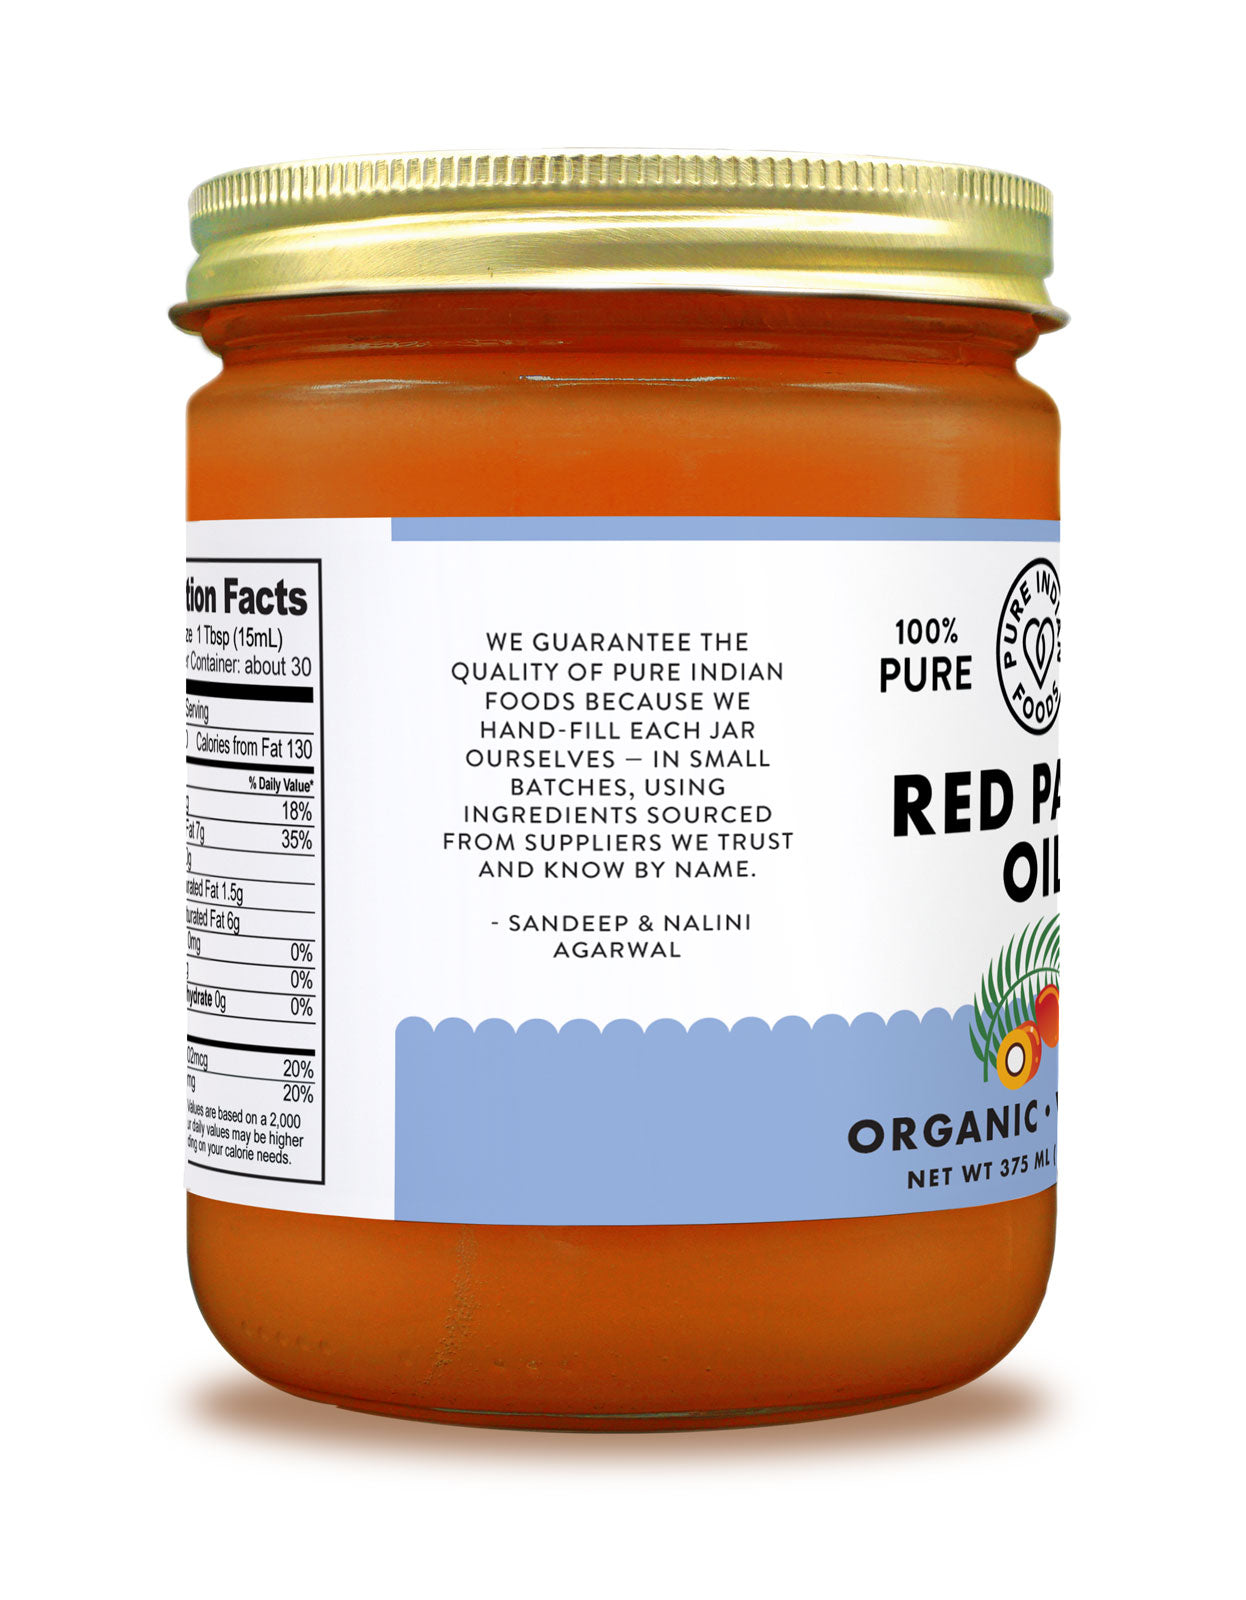 Side label on a jar of organic red palm oil from Pure Indian Foods with a message from Sandeep and Nalini Agarwal.